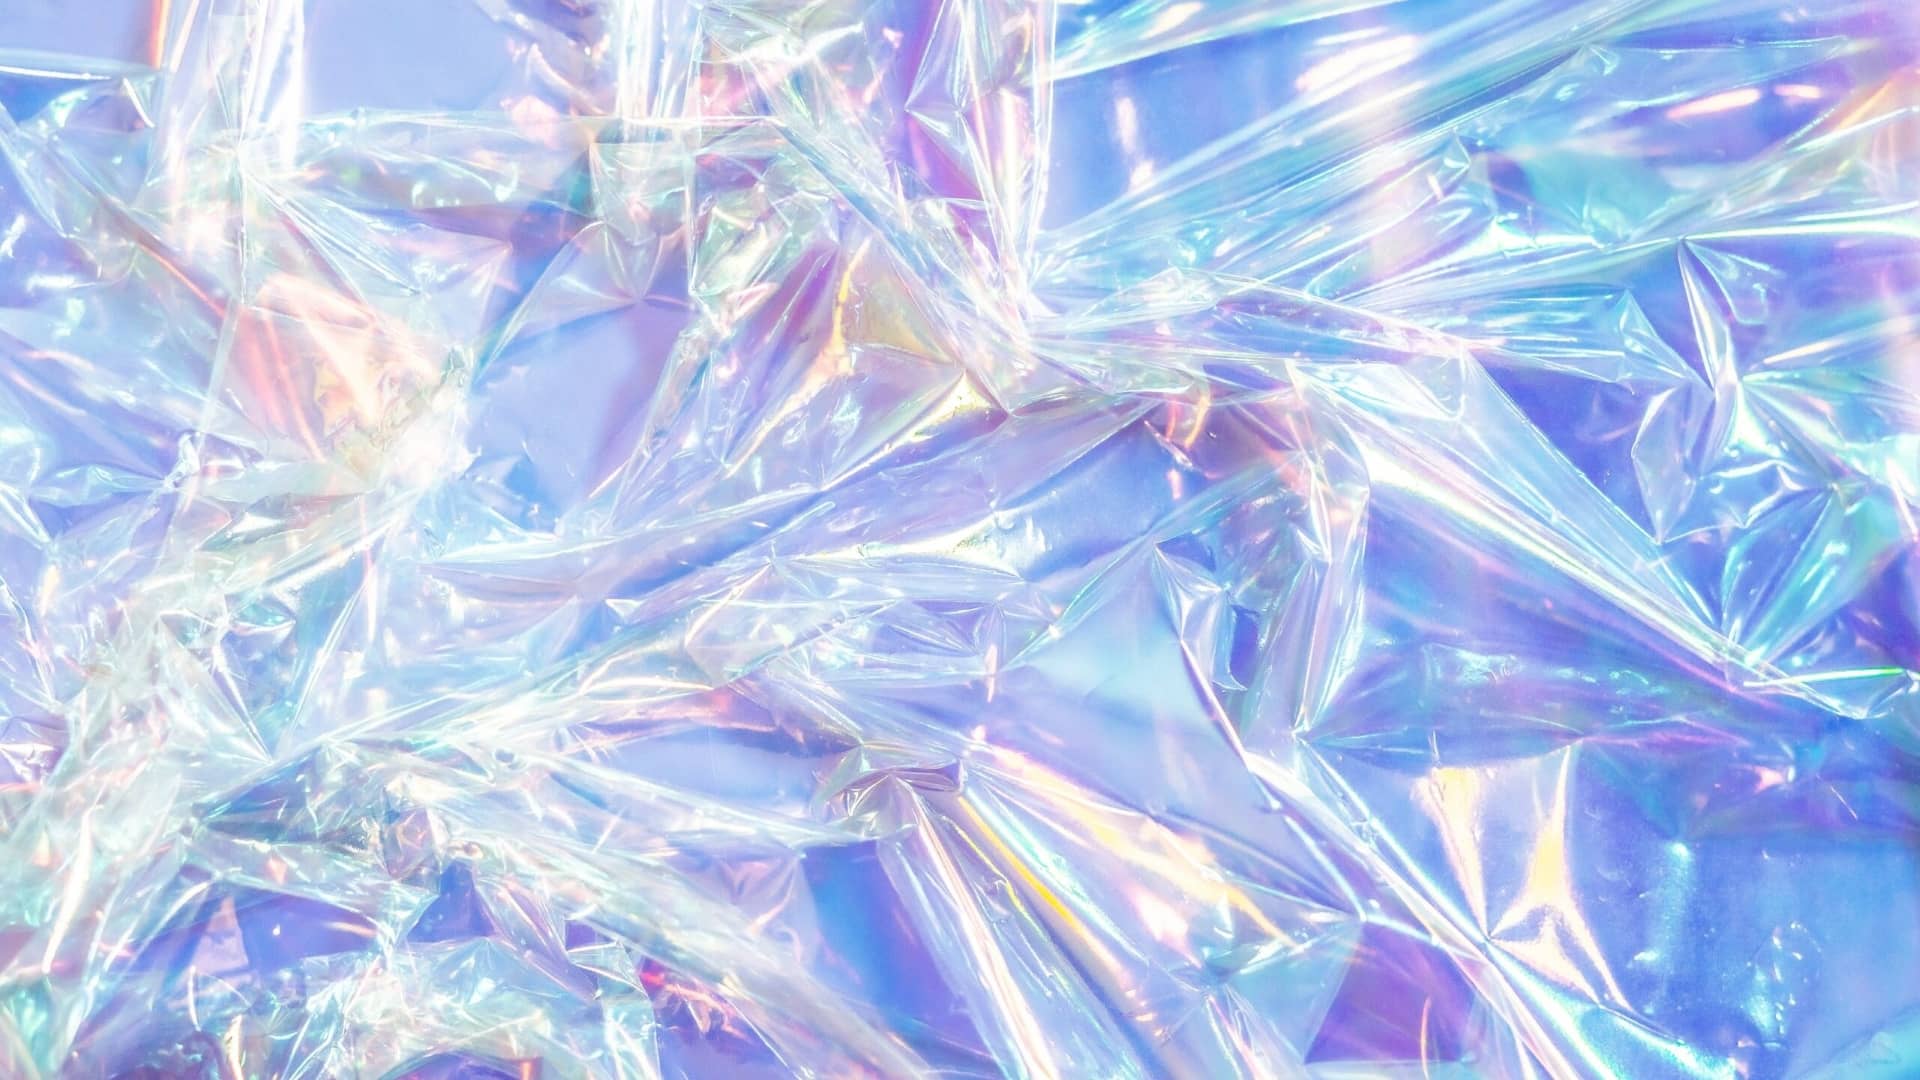 Crumpled iridescent holographic plastic resembling shards of glass.